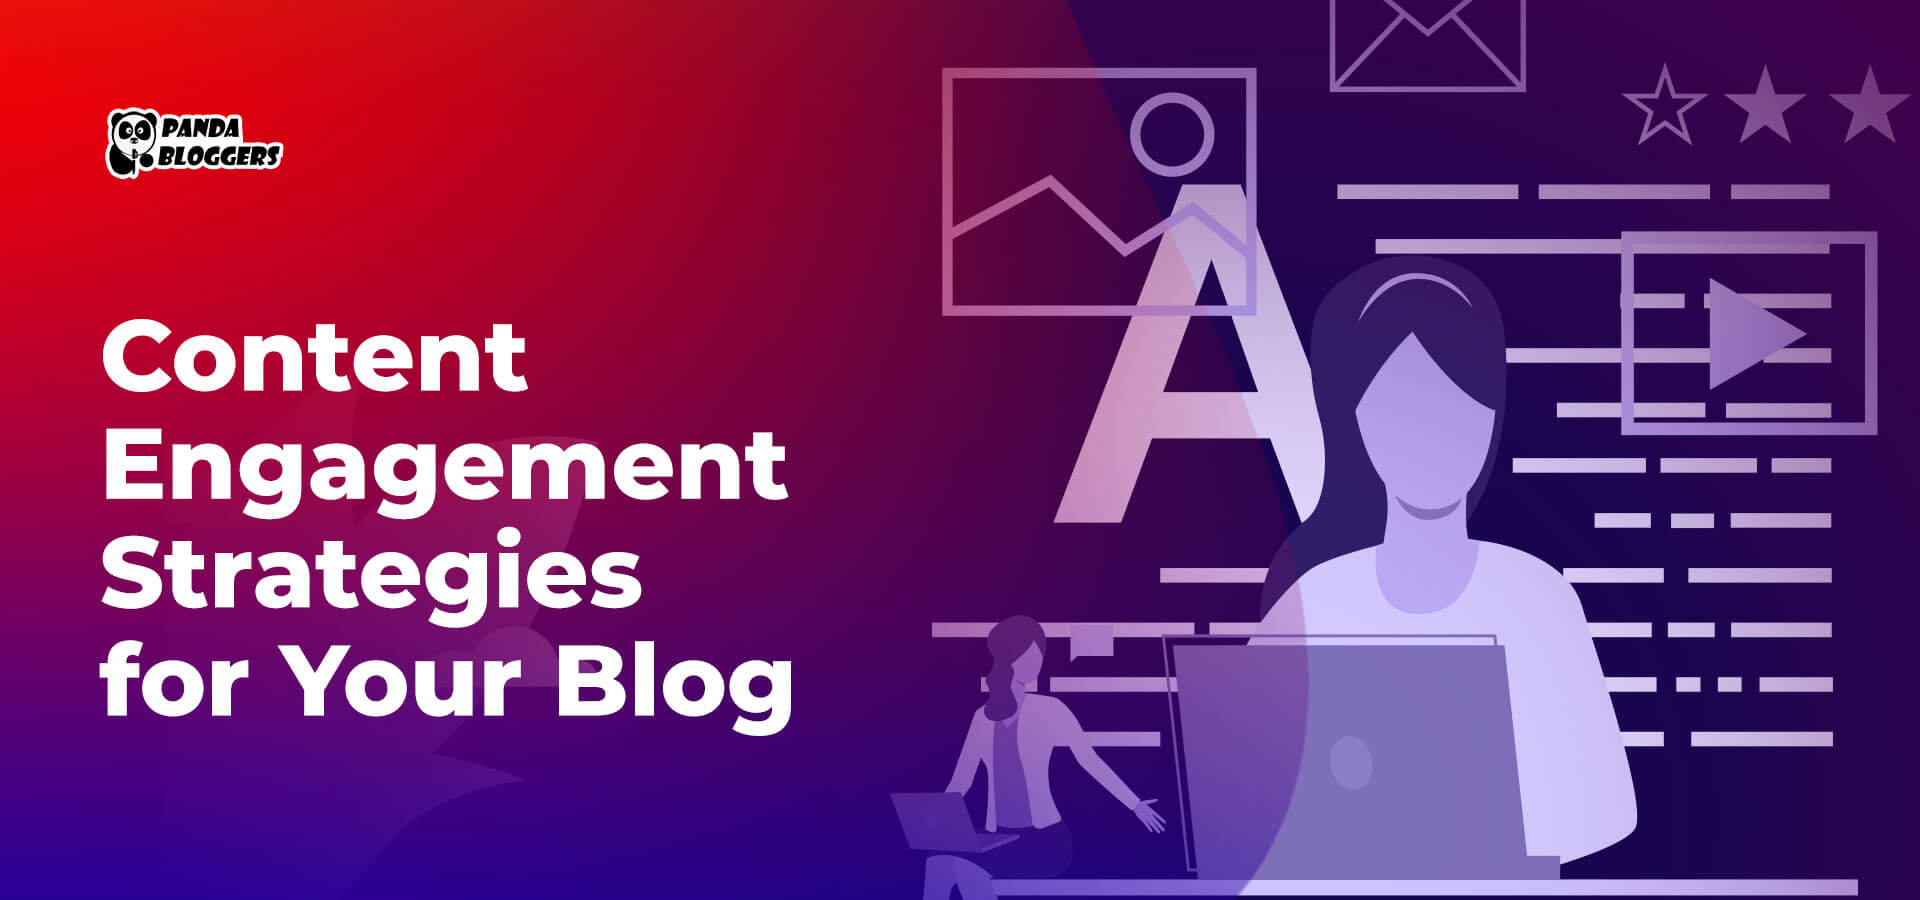 Content Engagement Strategies for your Blog